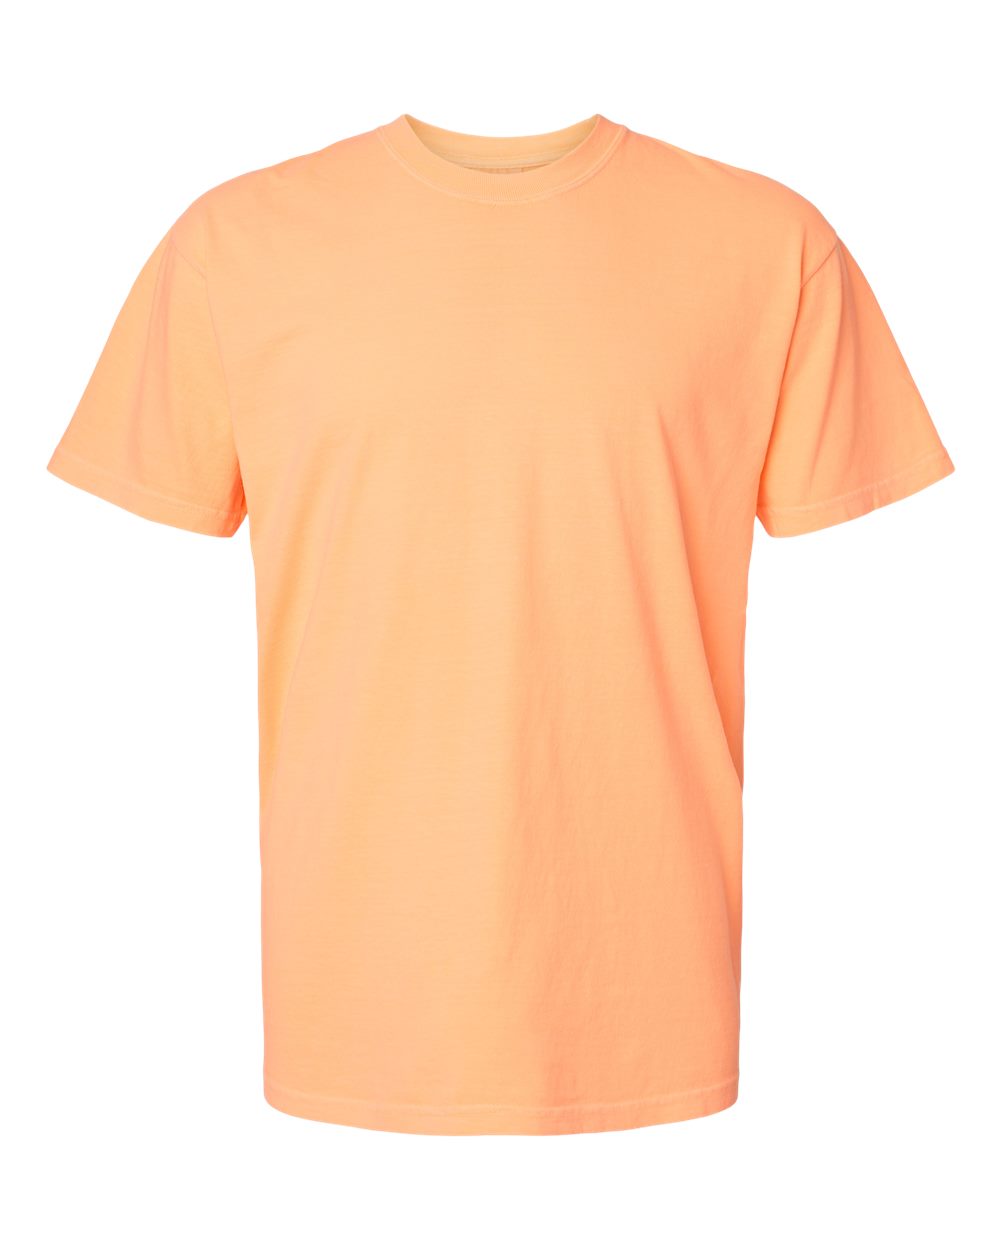 Comfort Colors Garment-Dyed Tee (1717) in Neon Cantaloupe